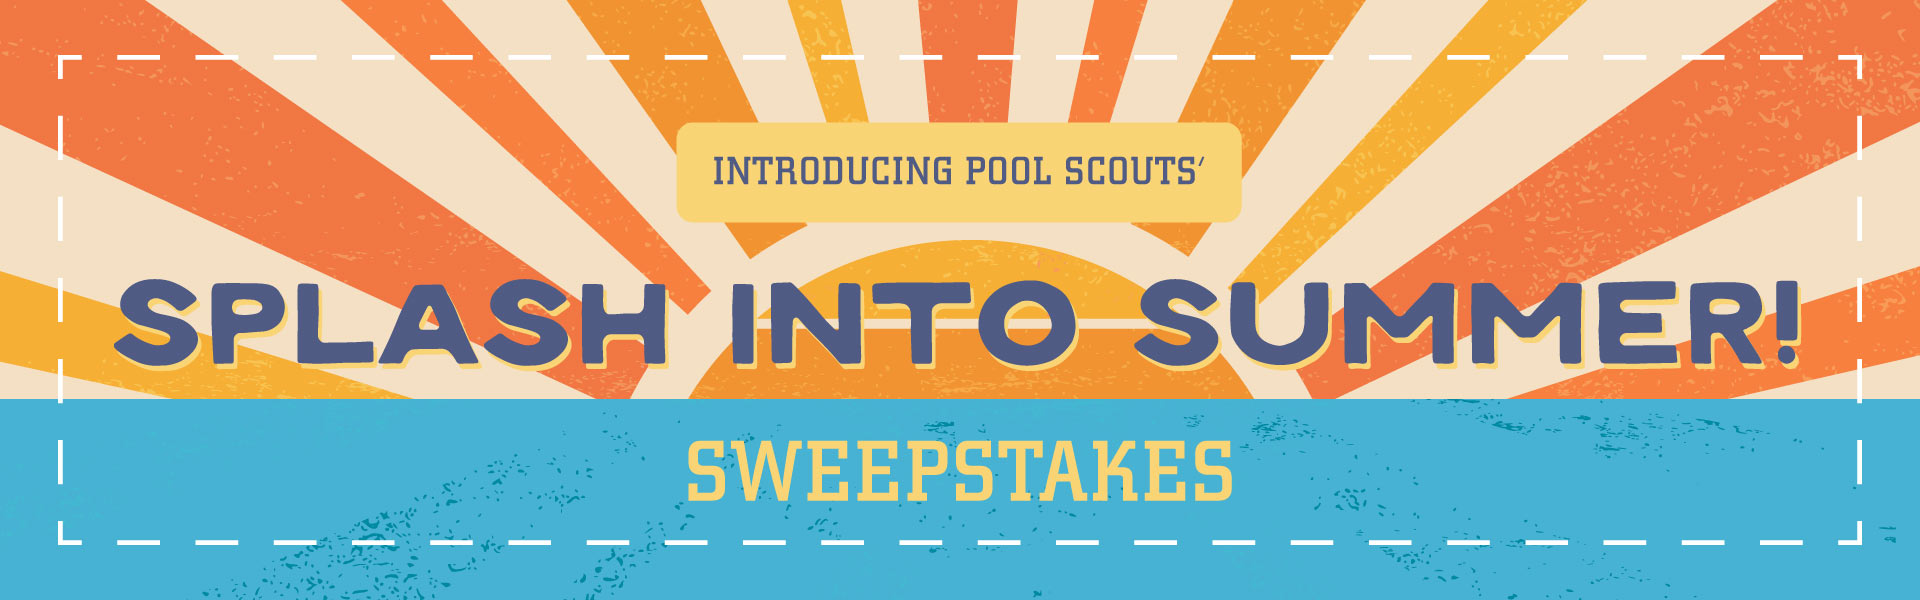 Enter to win a year of free pool cleaning service with Pool Scouts through the Summer Sweepstakes